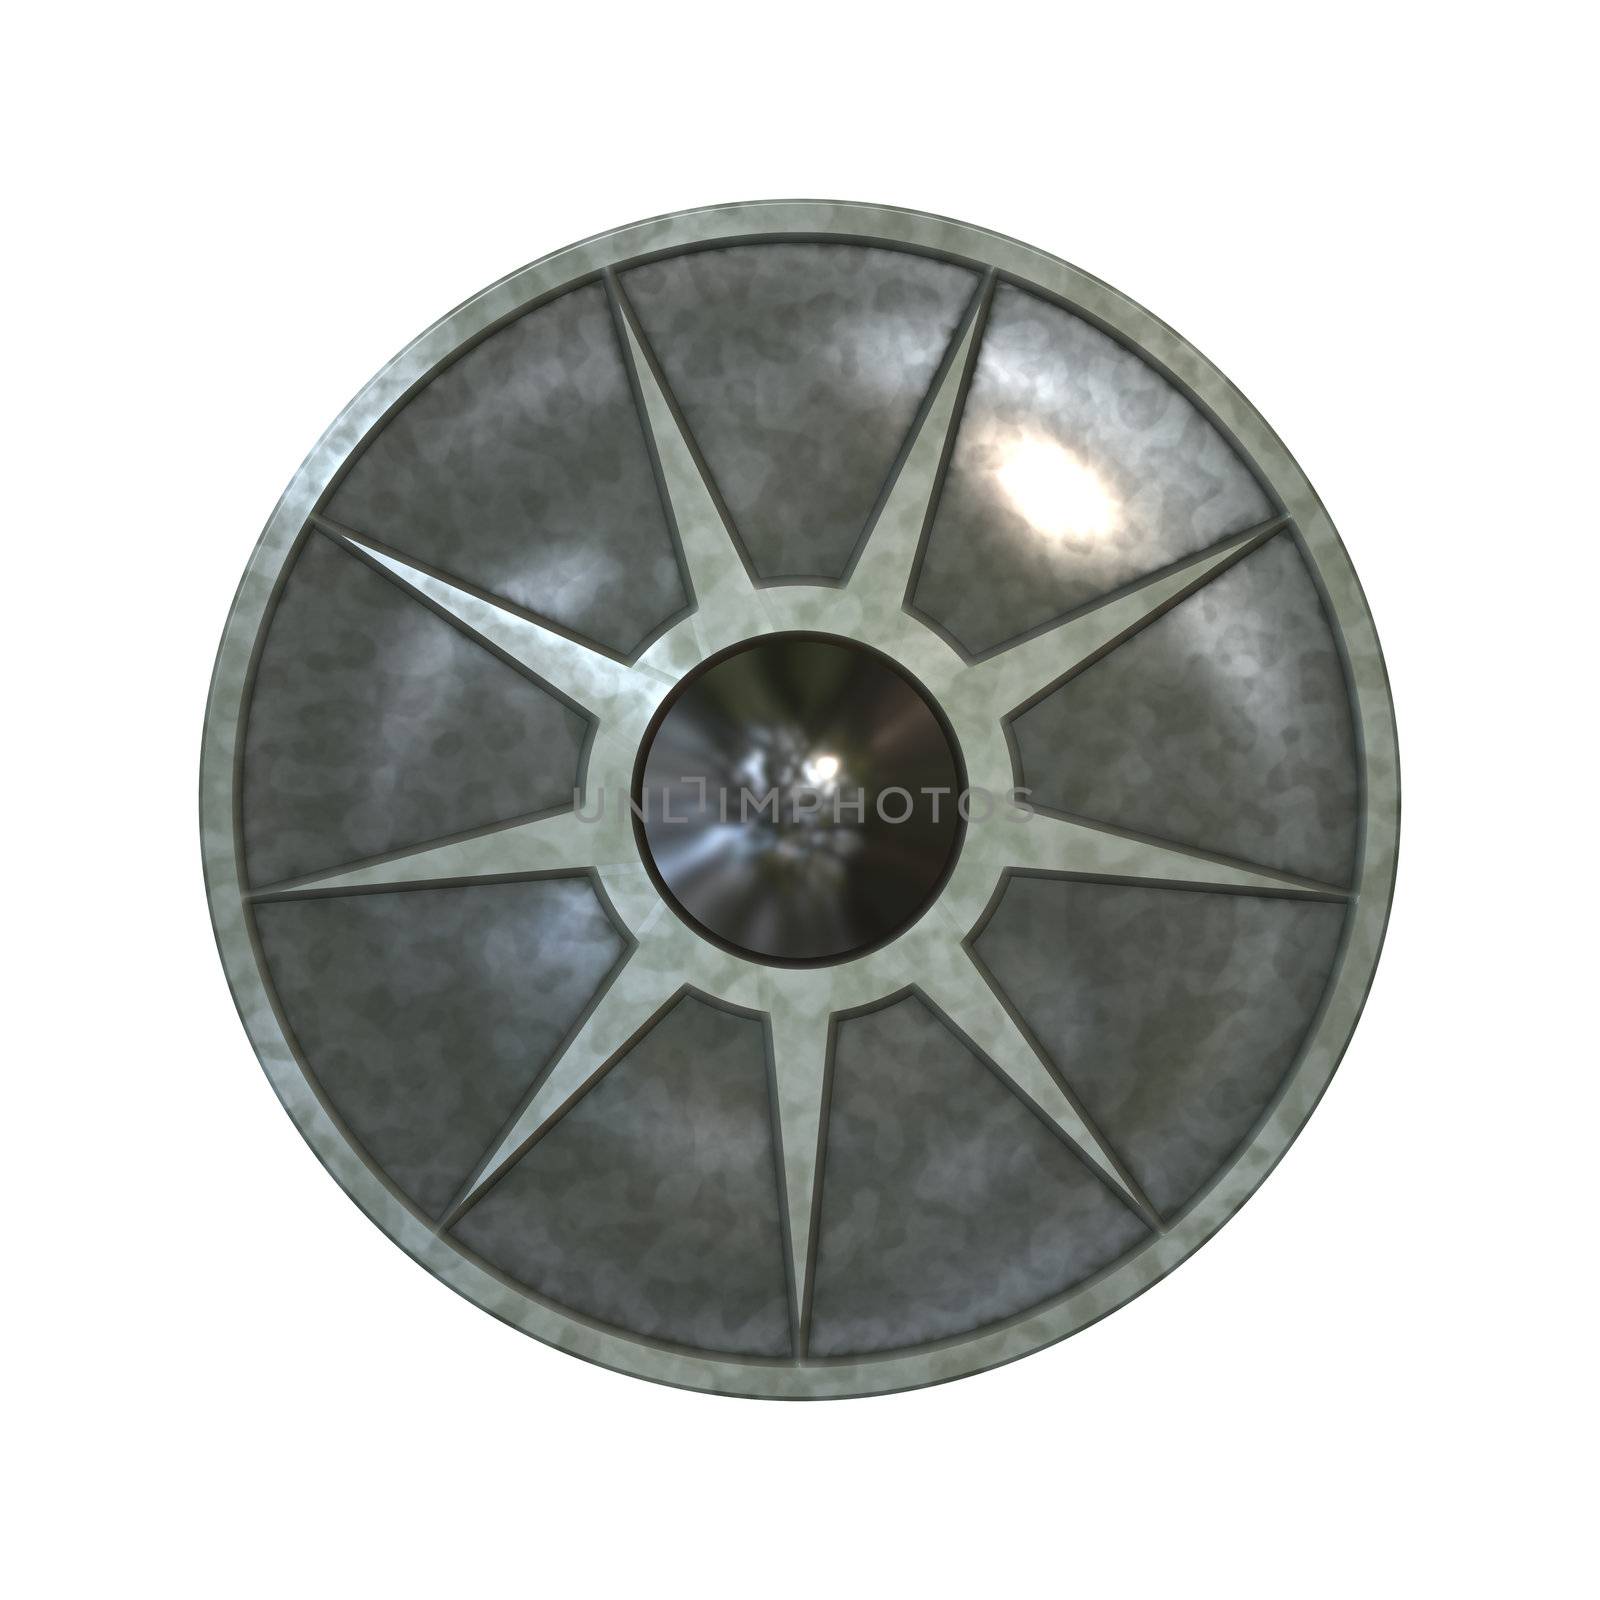 An image of a nice vintage shield